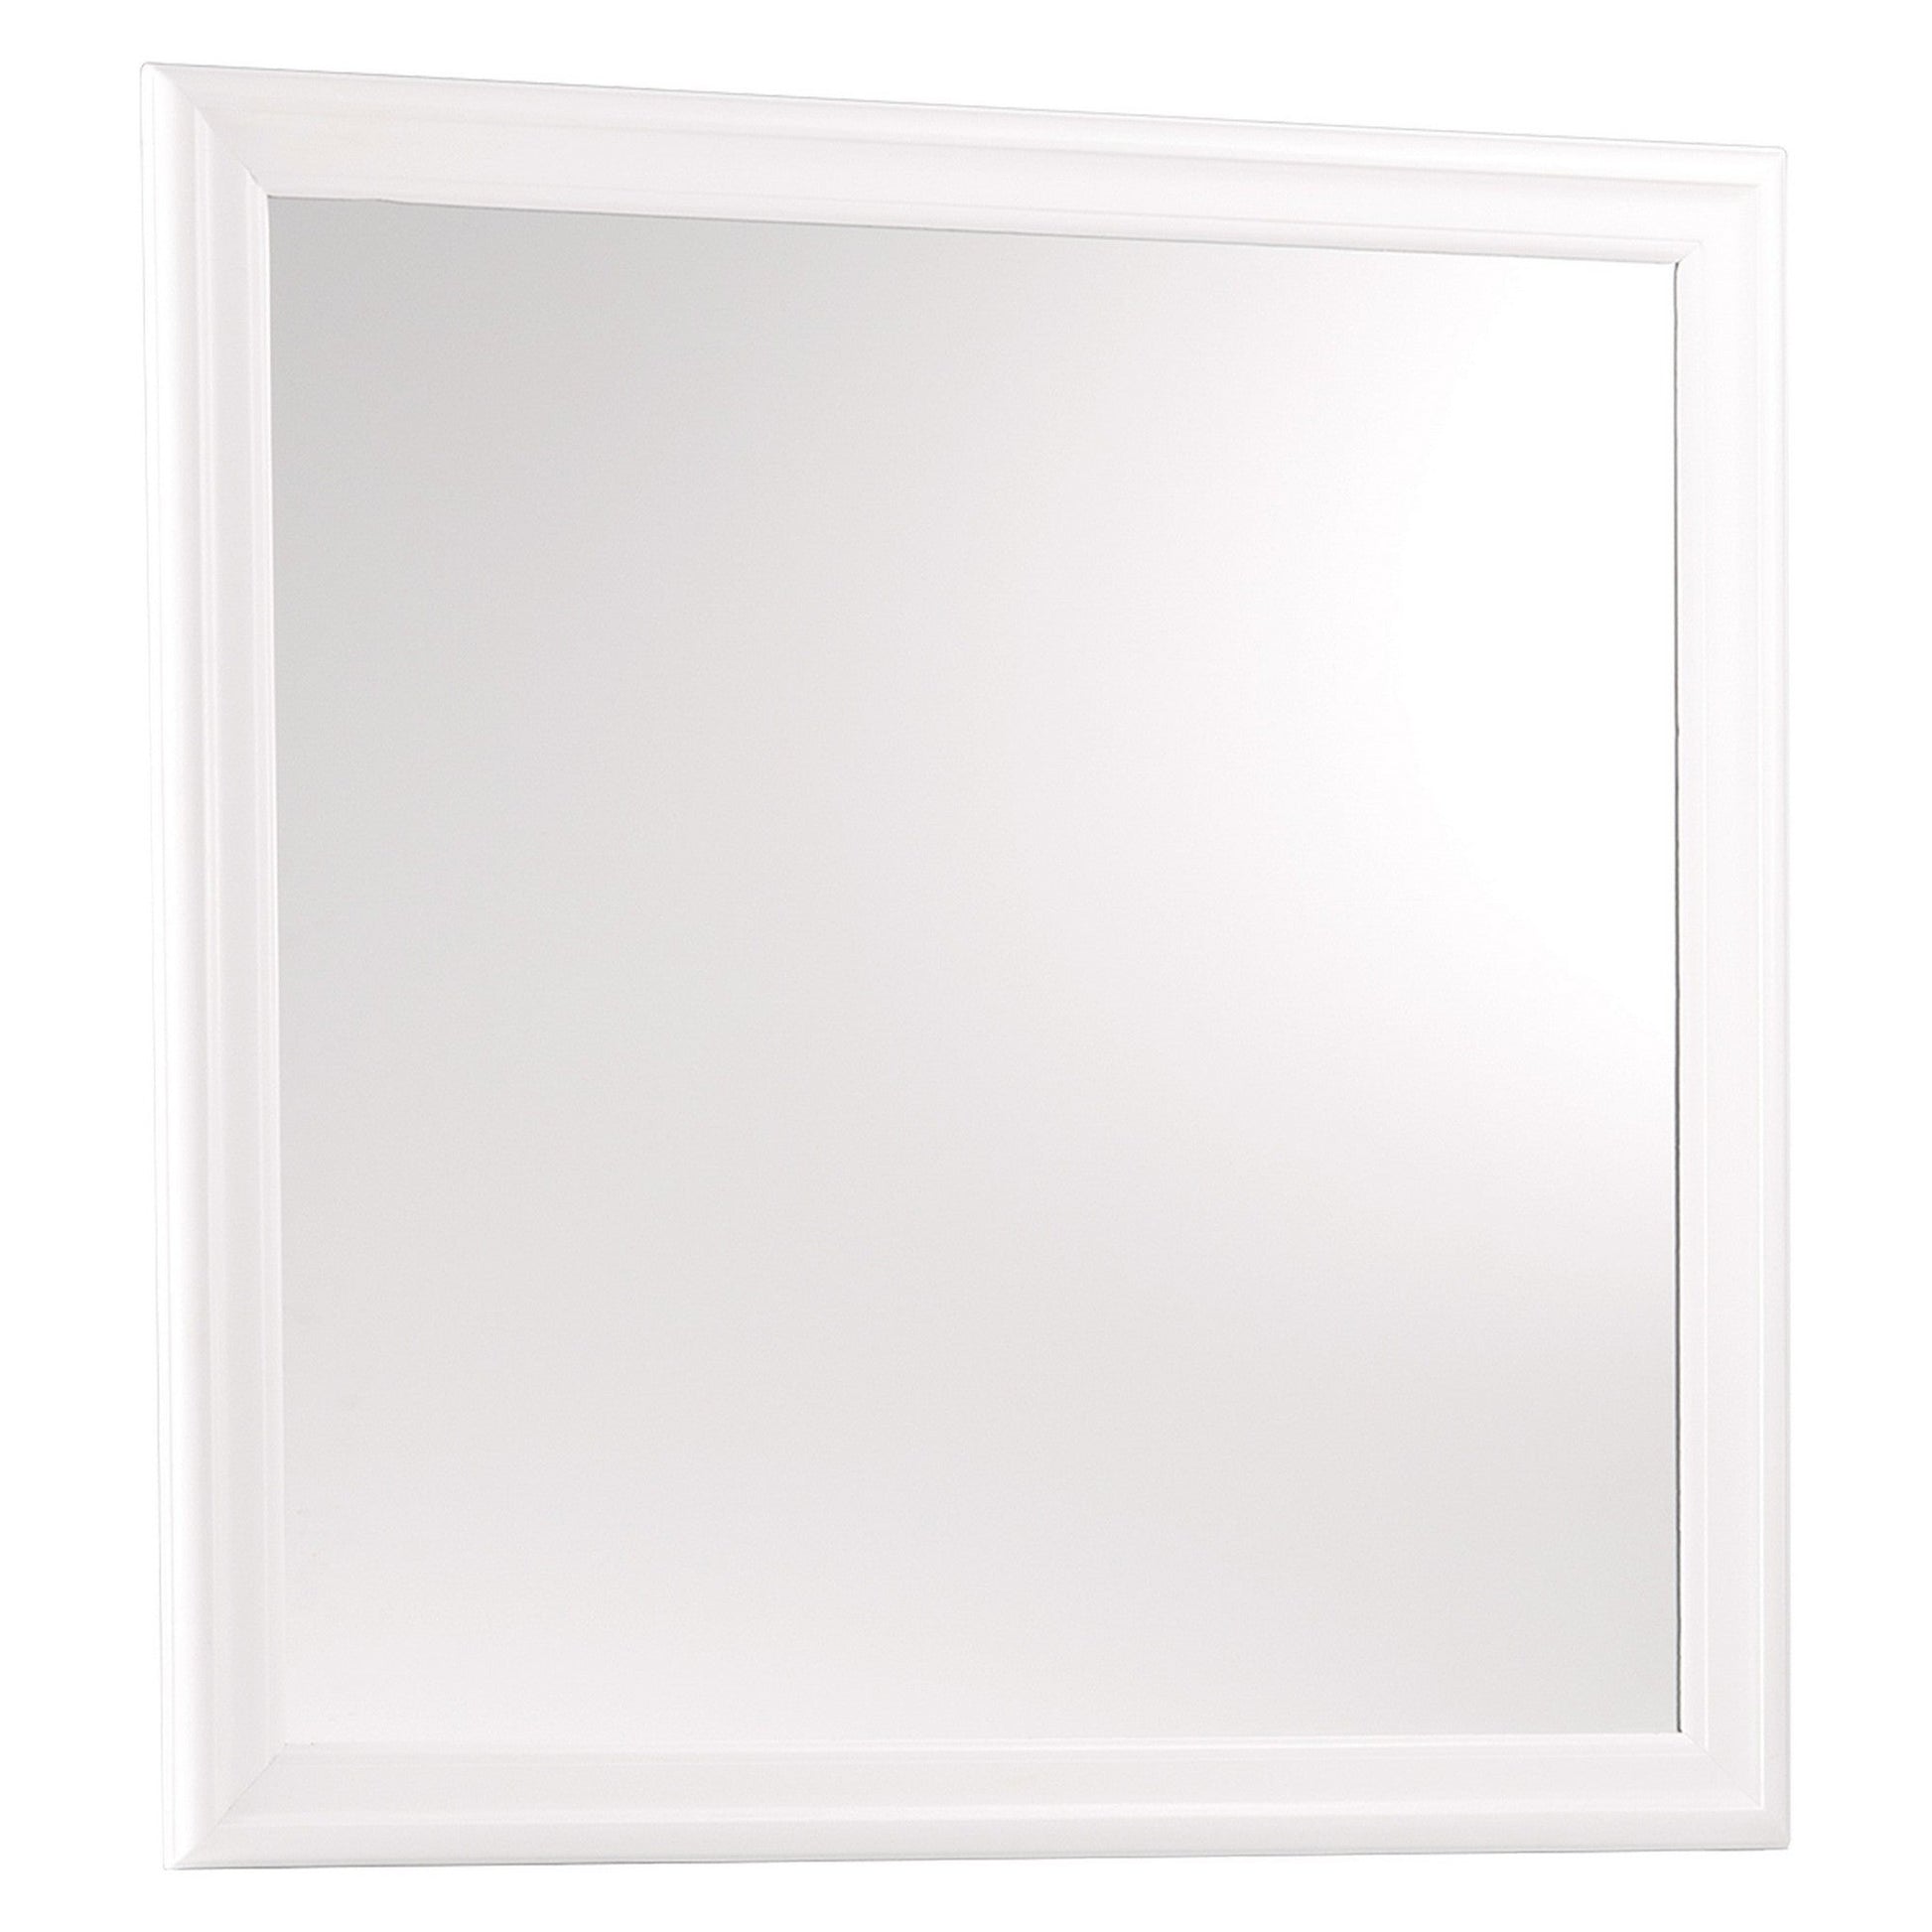 Benzara White Transitional Square Mirror With Wooden Encasing and Convex Edges